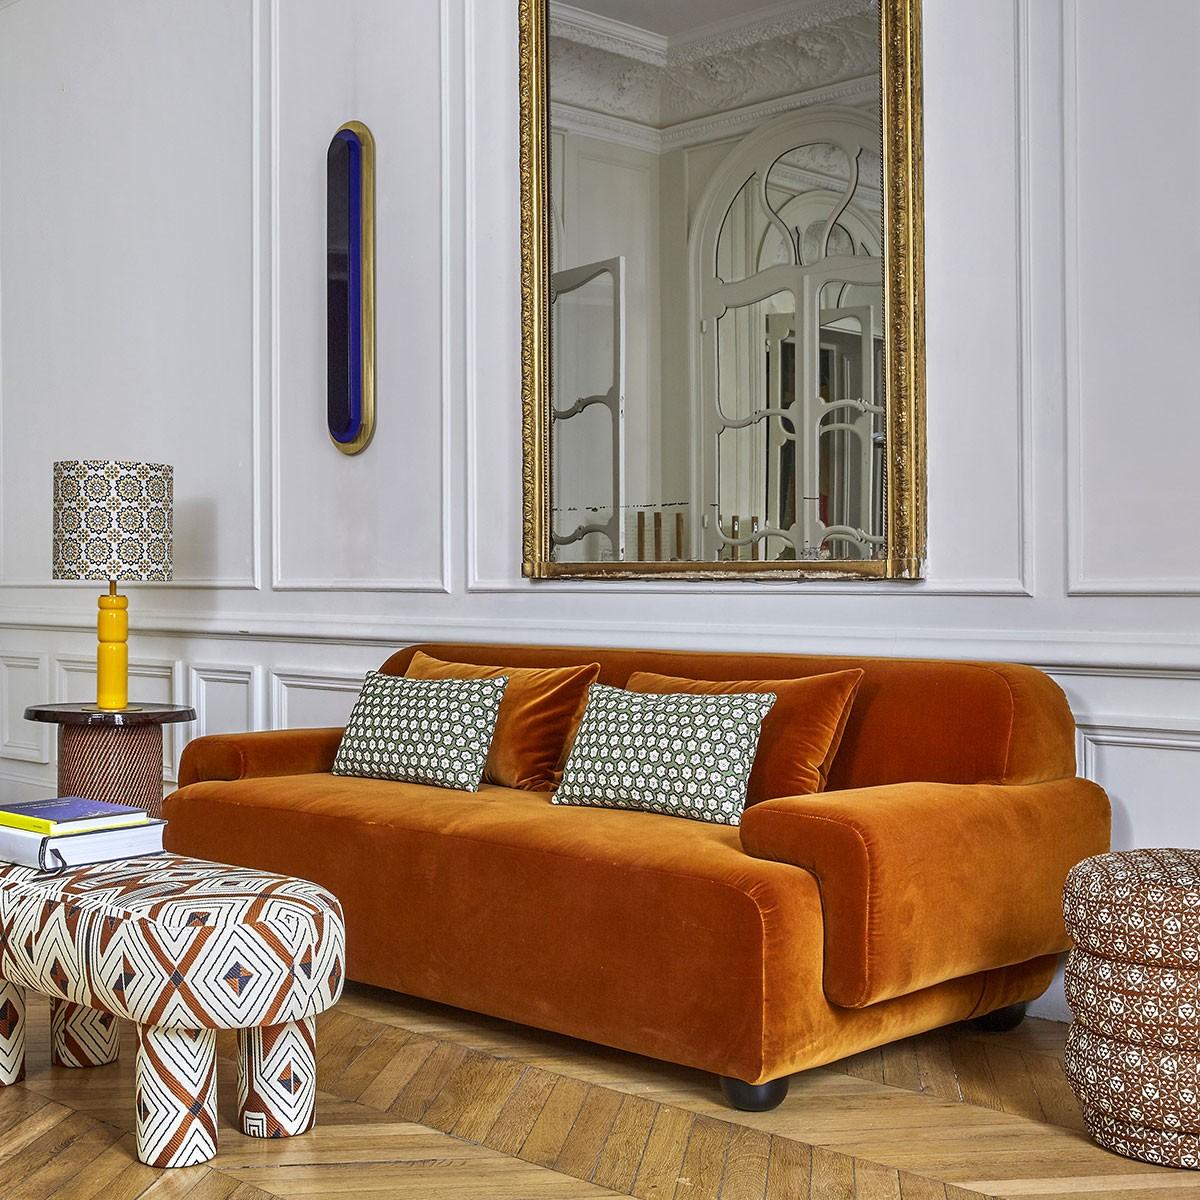 Popus Editions Lena 2.5 Seater Sofa in Sangria London Linen Fabric

It looks like it's straight out of a movie, with its generous curves and wide armrests. It is a real invitation to spend long Sundays with the family, comfortably seated in front